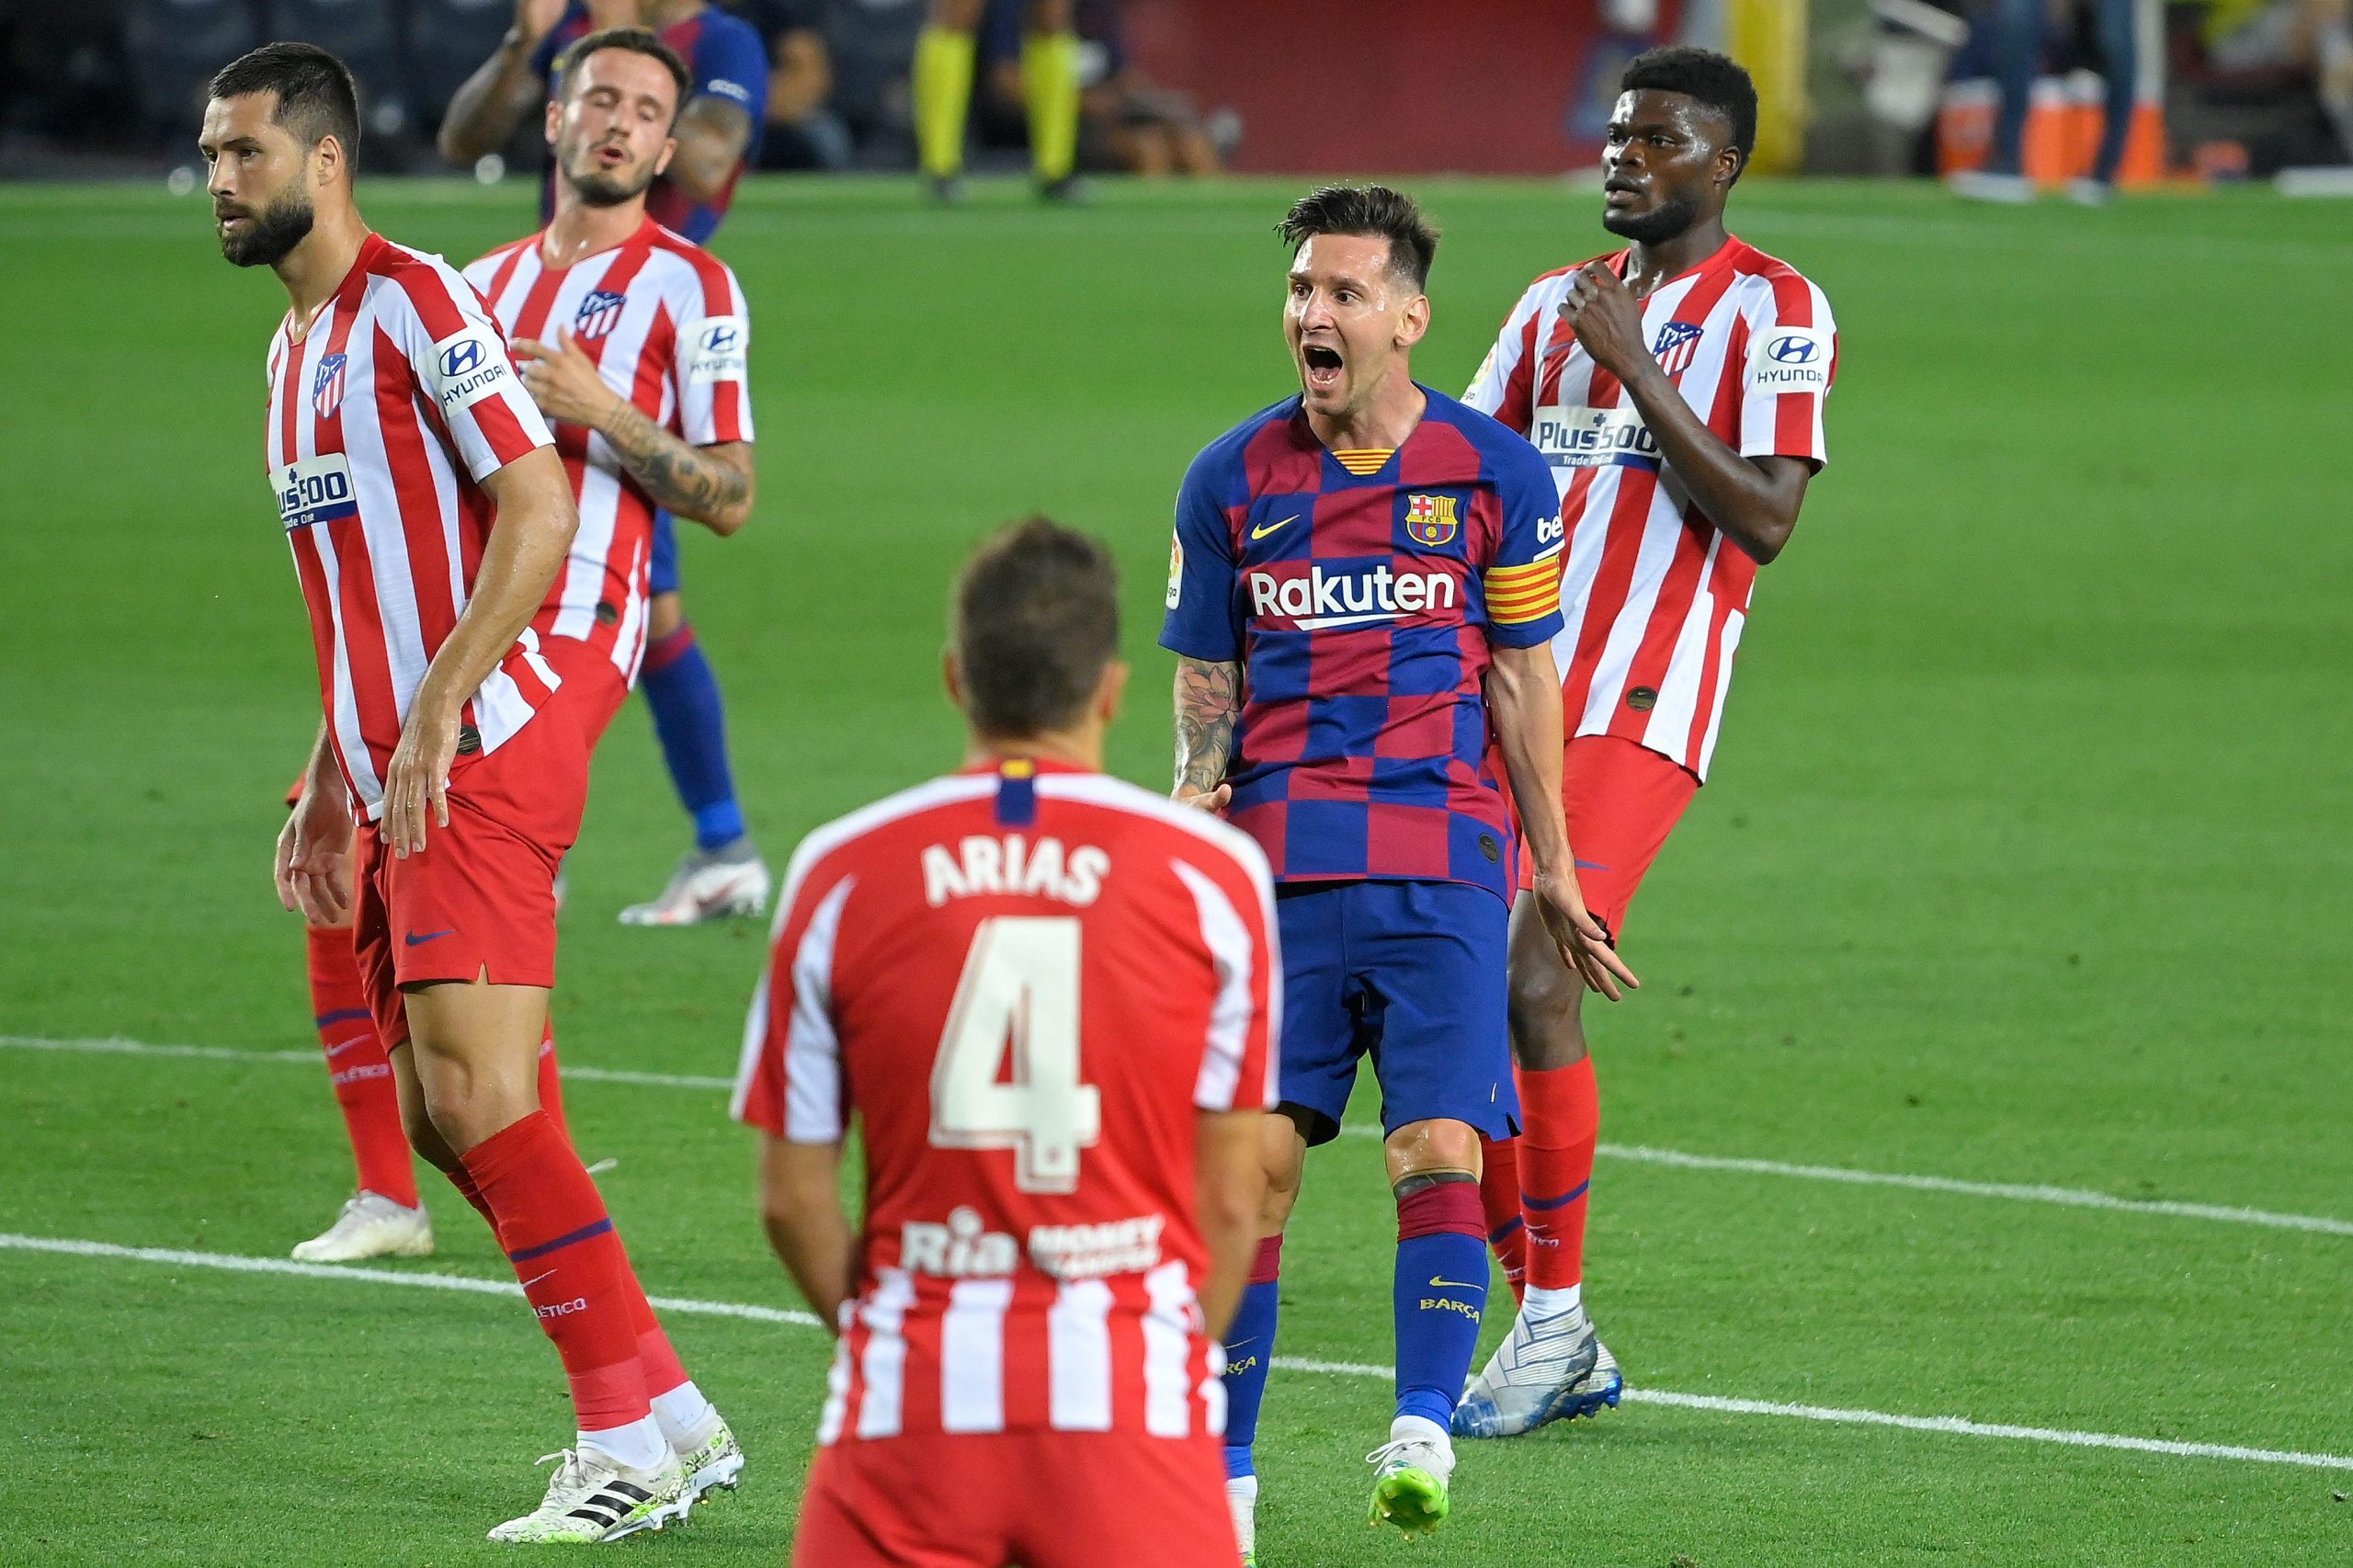 Lionel Messi reacts after missing a goal opportunity during the match between FC Barcelona and Atletico de Madrid / LLUIS GENE / AFP GETTY IMAGES